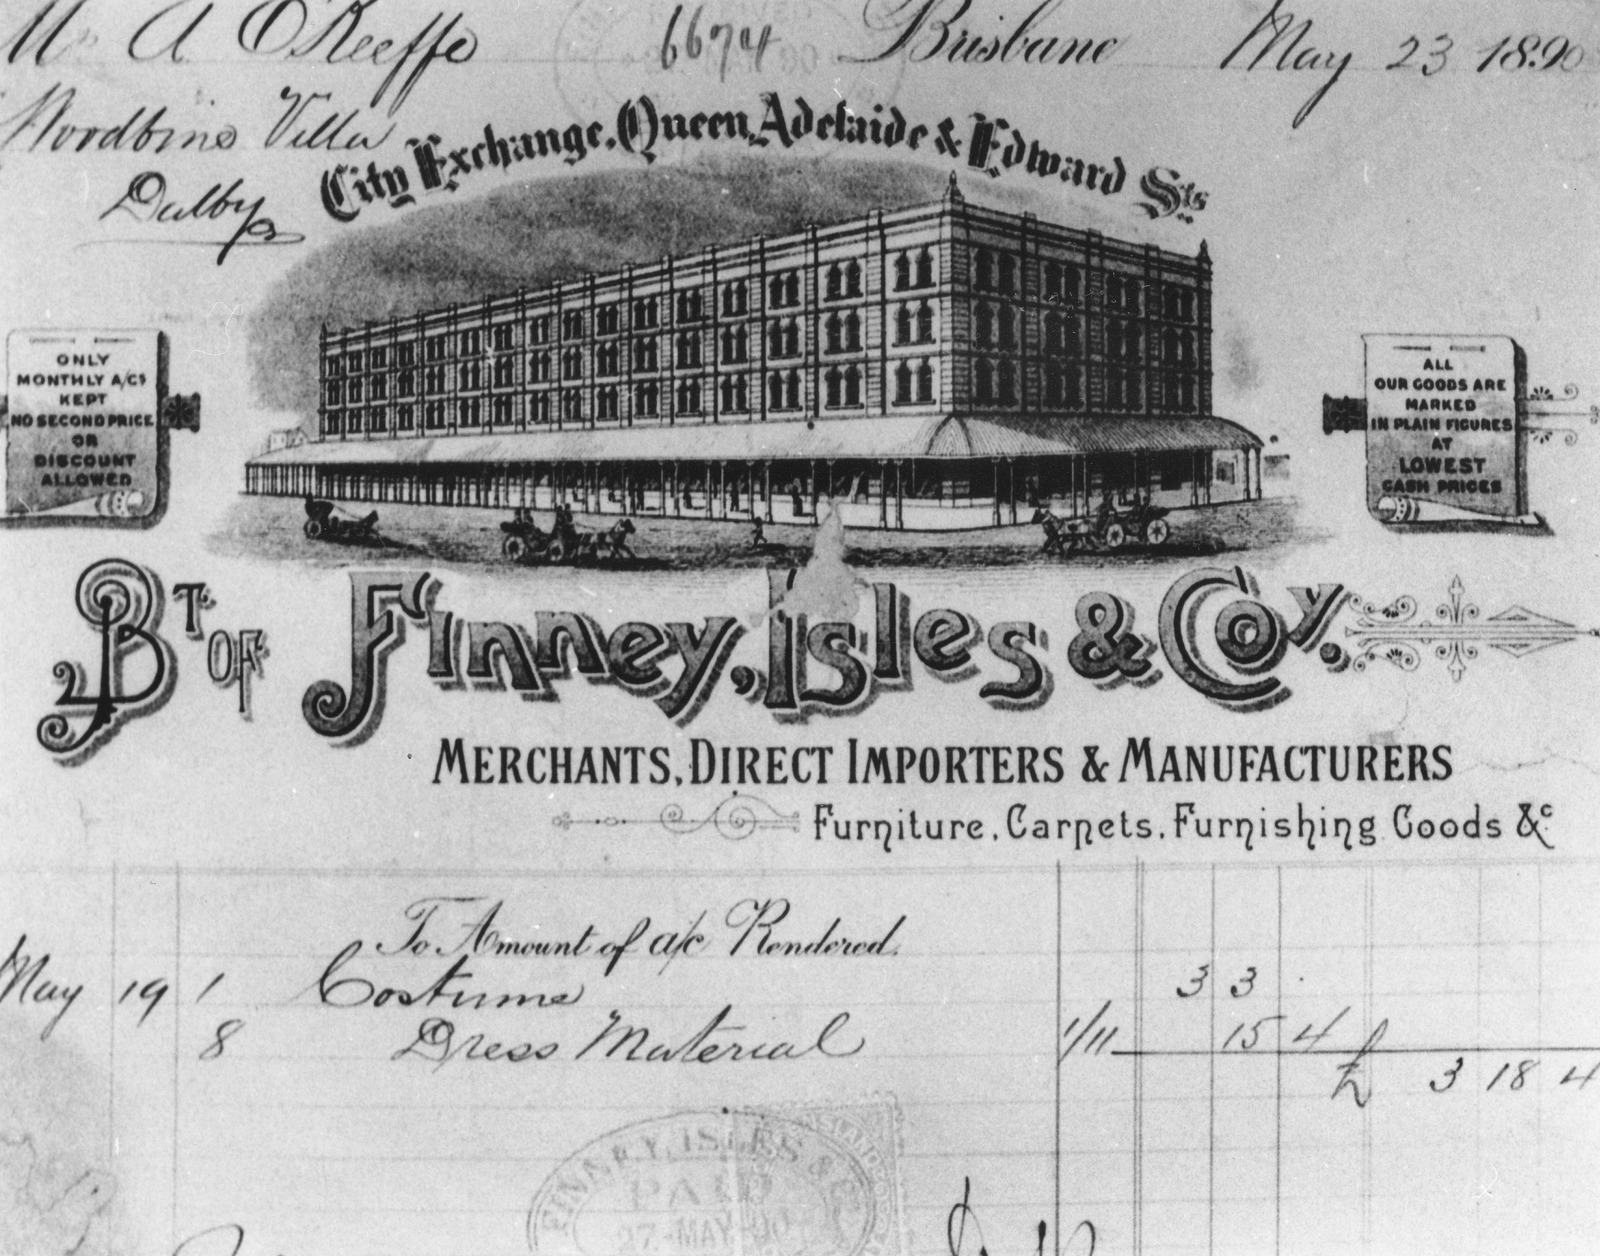 Letterhead showing Finney, Isles & Co. building at the corner of Queen Adelaide and Edward Streets, Brisbane, 1890